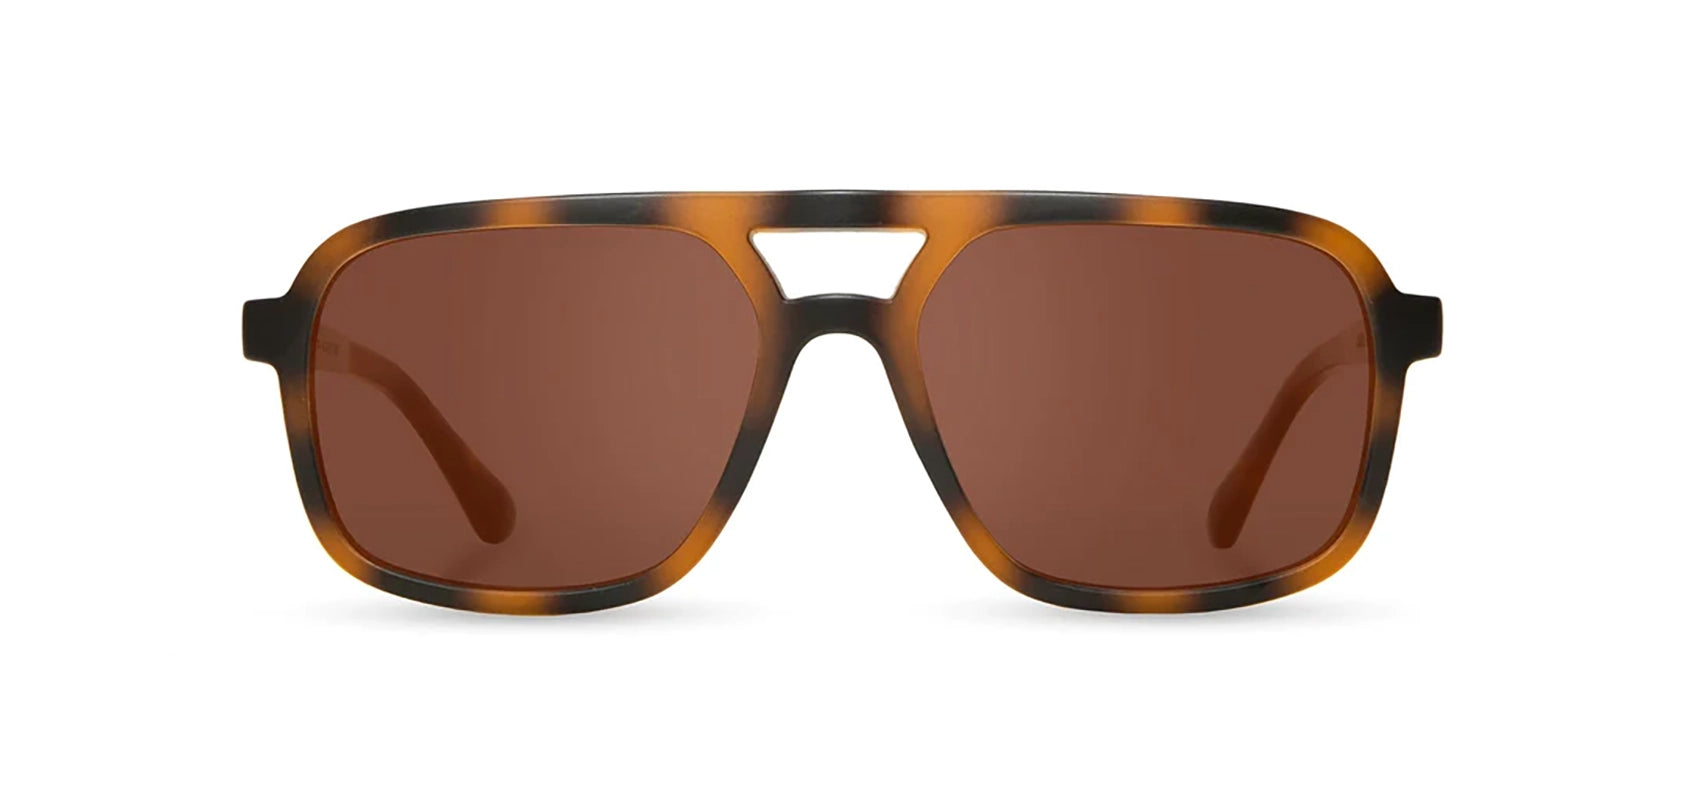 Camp Glacier Sunglasses with Matte Tortoise / walnut frames and brown polarized lenses, front  view